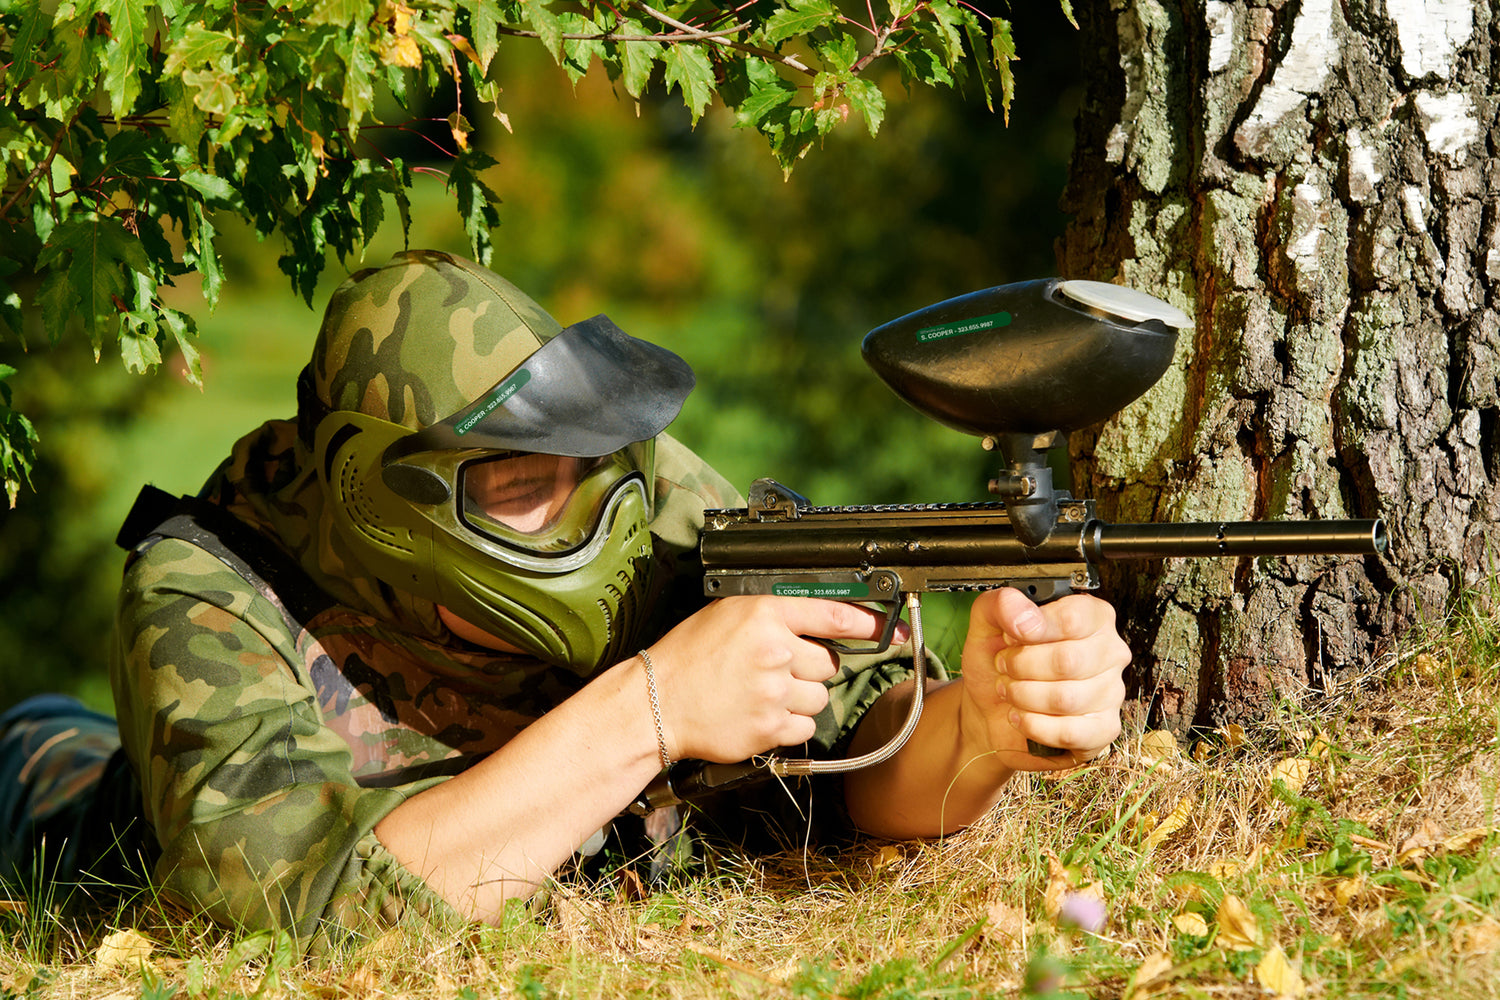 Paintball equipment is easily found when labelled with a custom identification sticker.